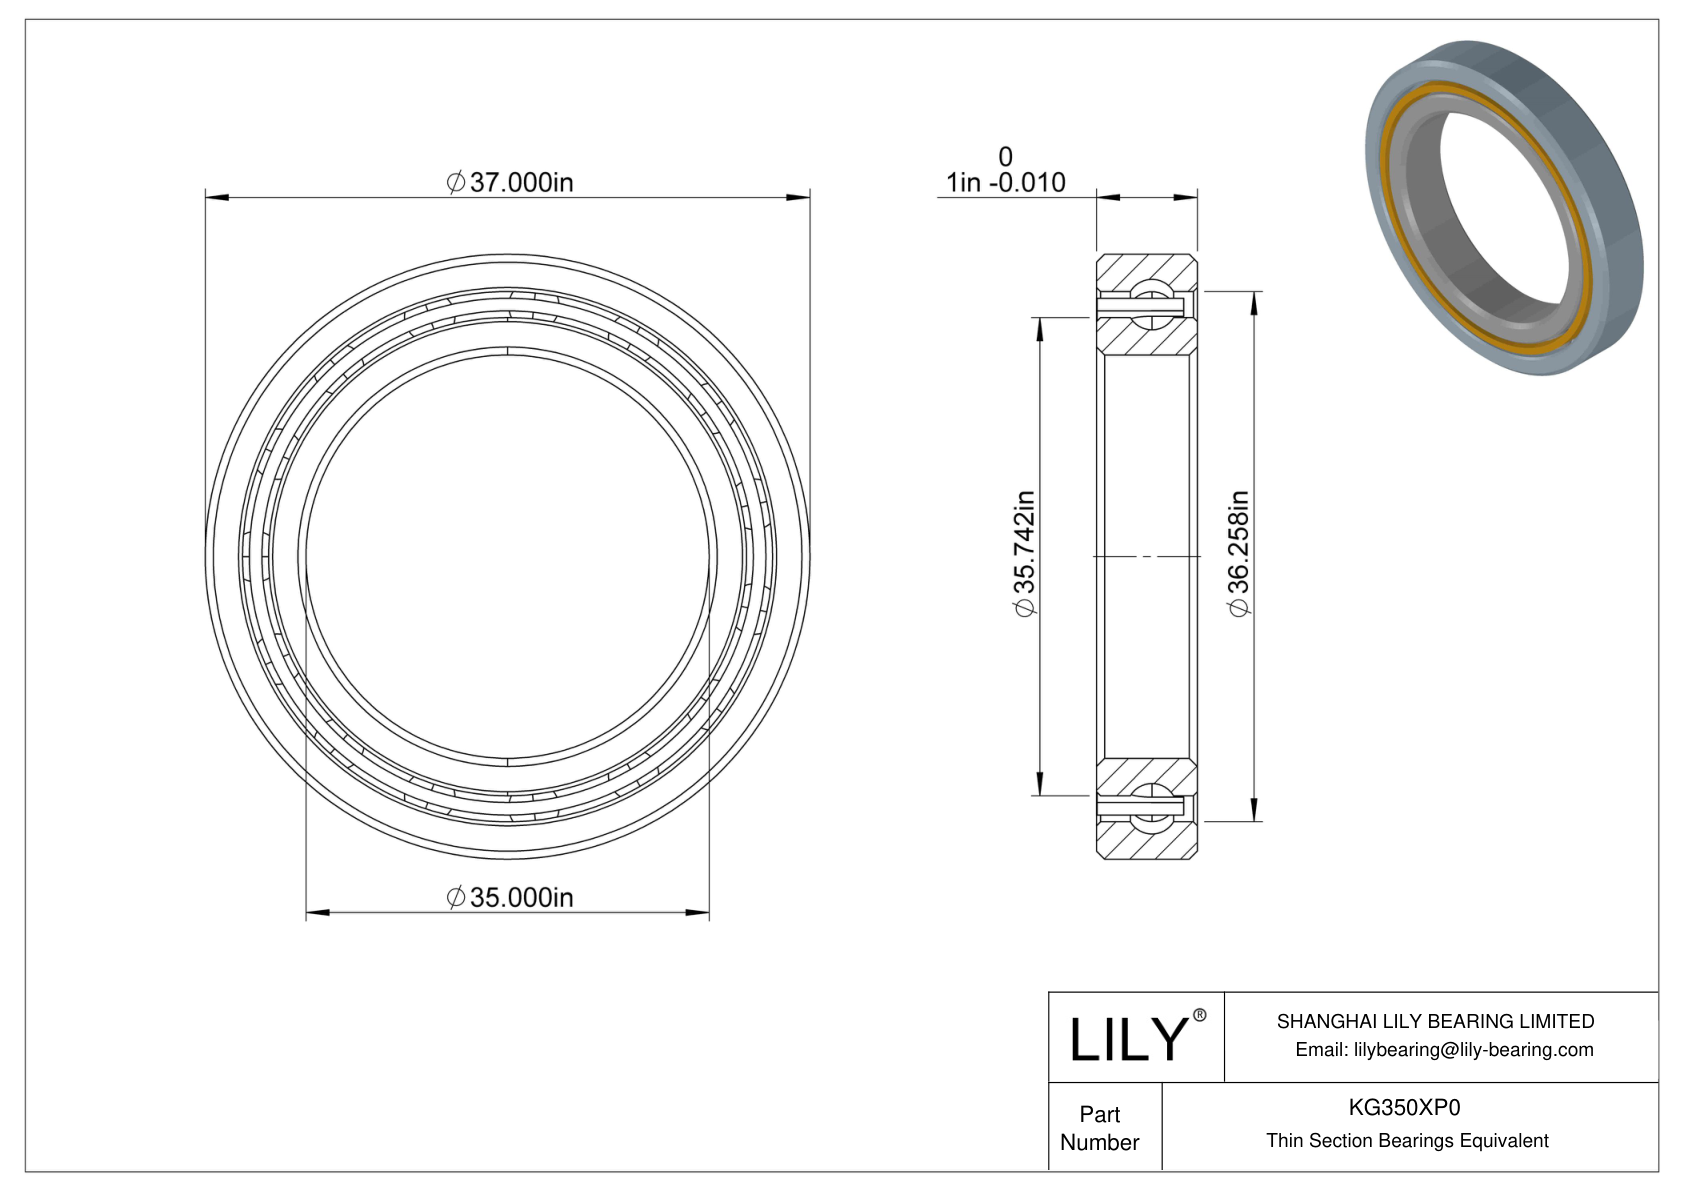 KG350XP0 Constant Section (CS) Bearings cad drawing